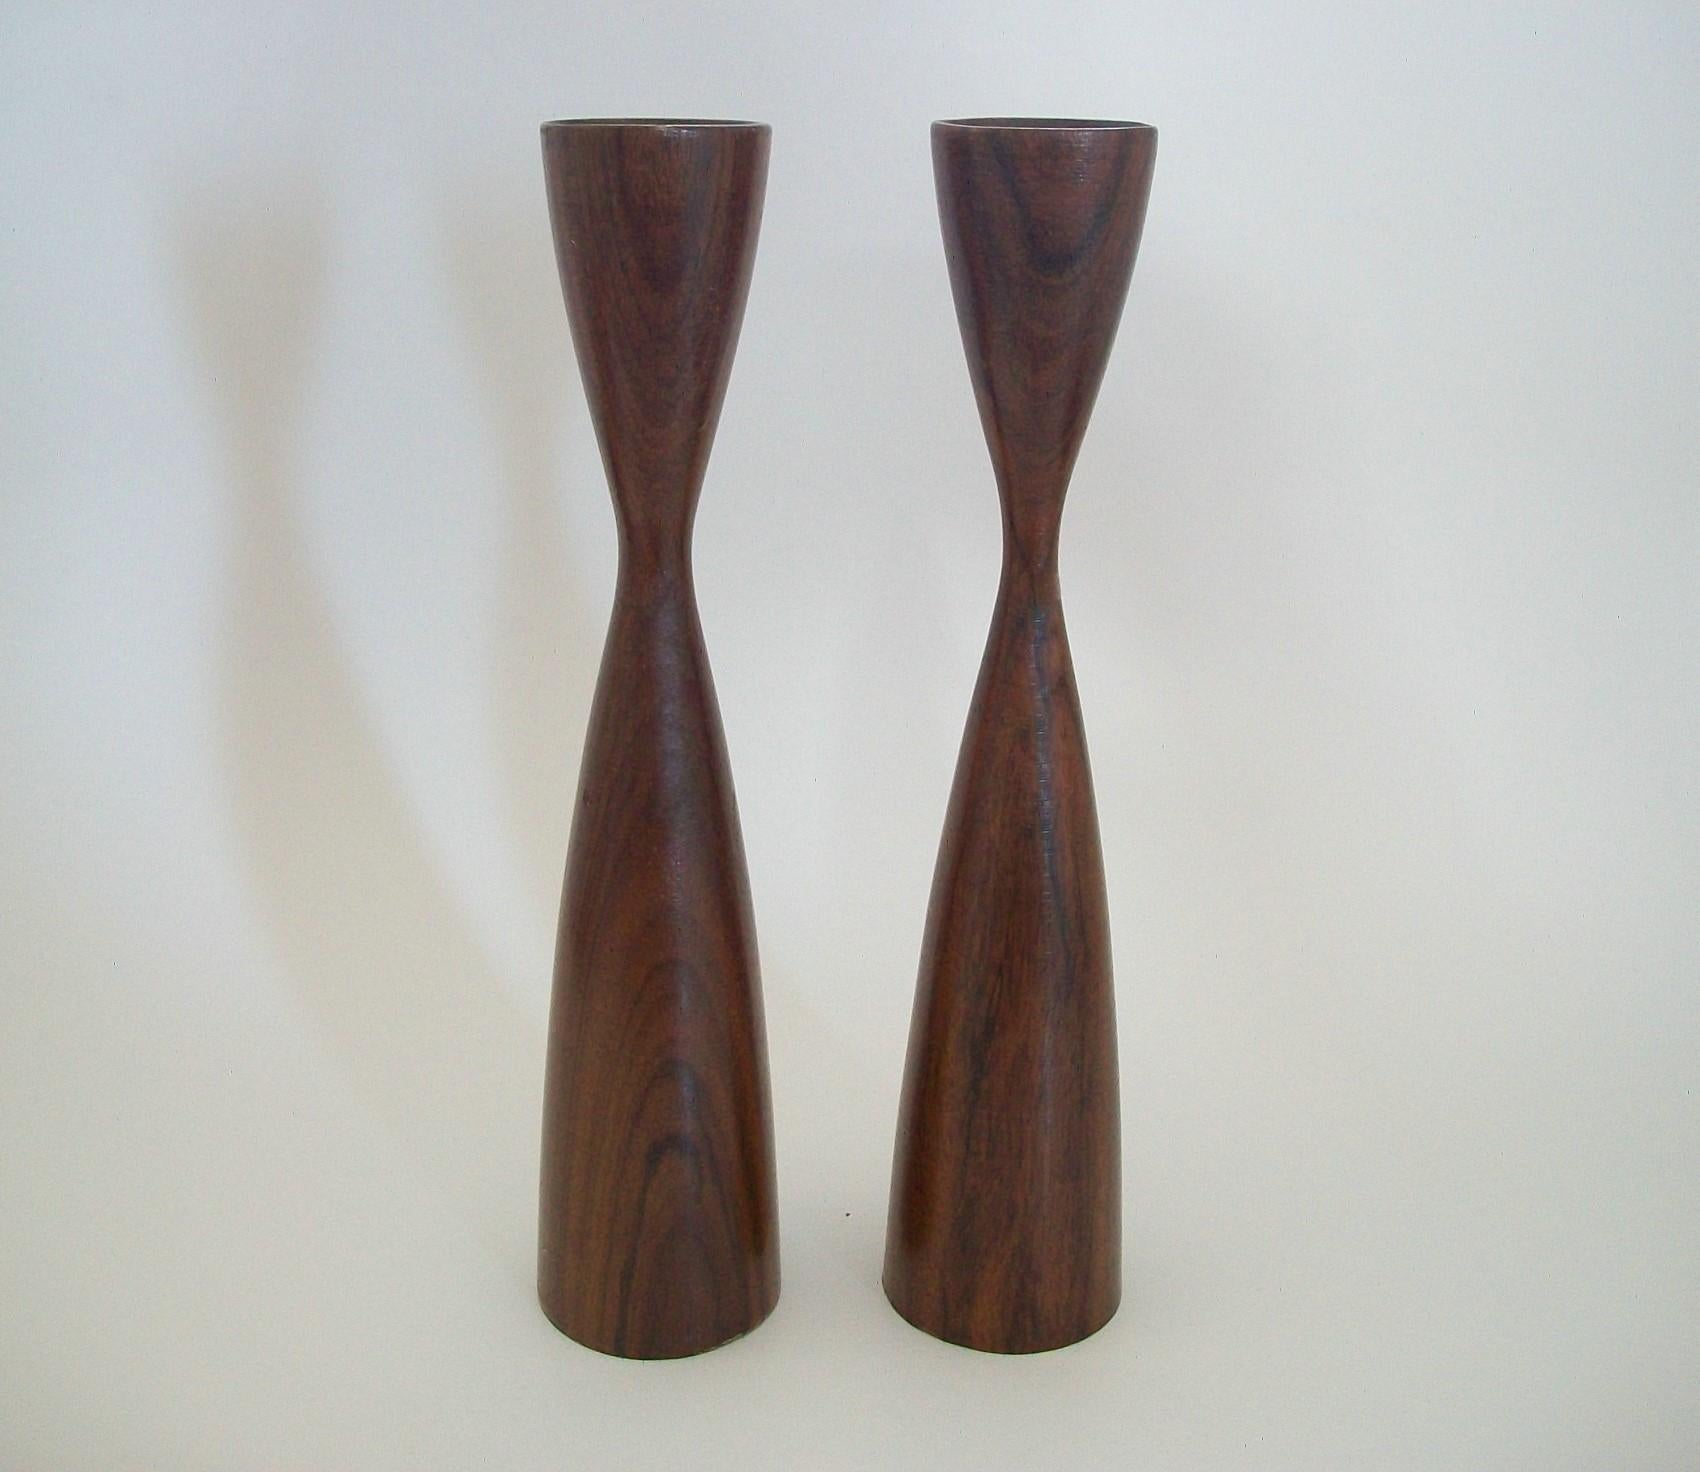 Pair of midcentury Danish teak candlesticks - featuring an elegant modern design in a medium brown finish - each signed on the base (unidentified maker) - Denmark - circa 1960s.

Excellent vintage condition - minor scuffs - no loss - no damage -